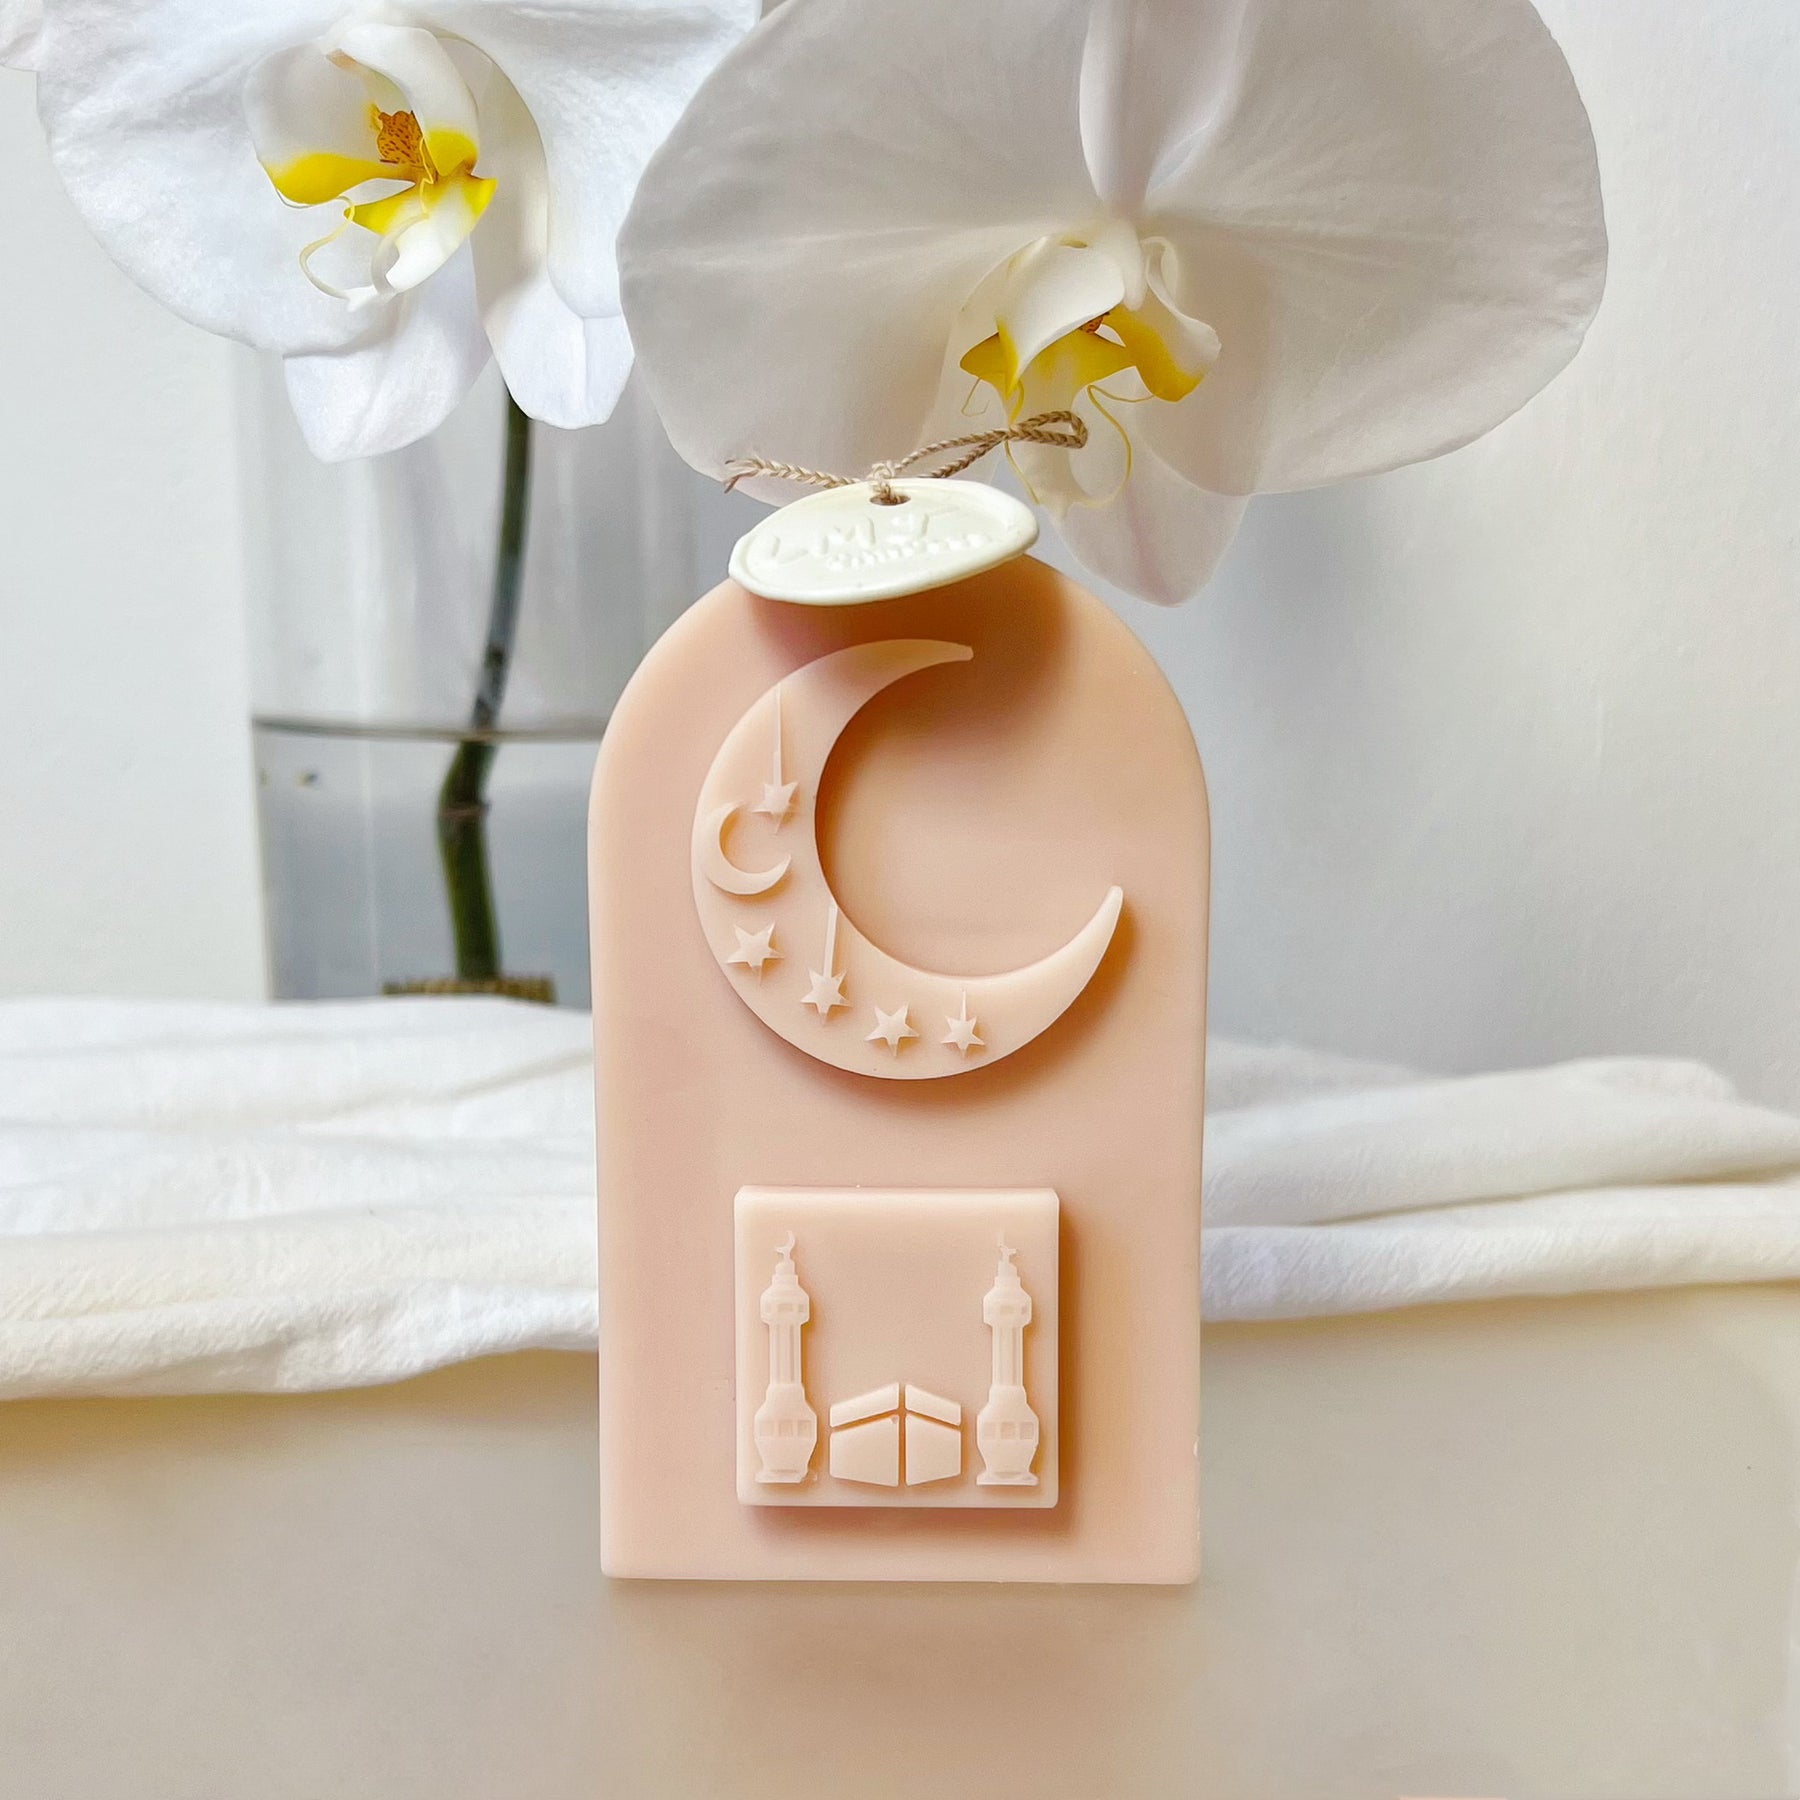 Arch Shaped Ramadan Candle - Eid Décor & Gifts | LMJ Candles